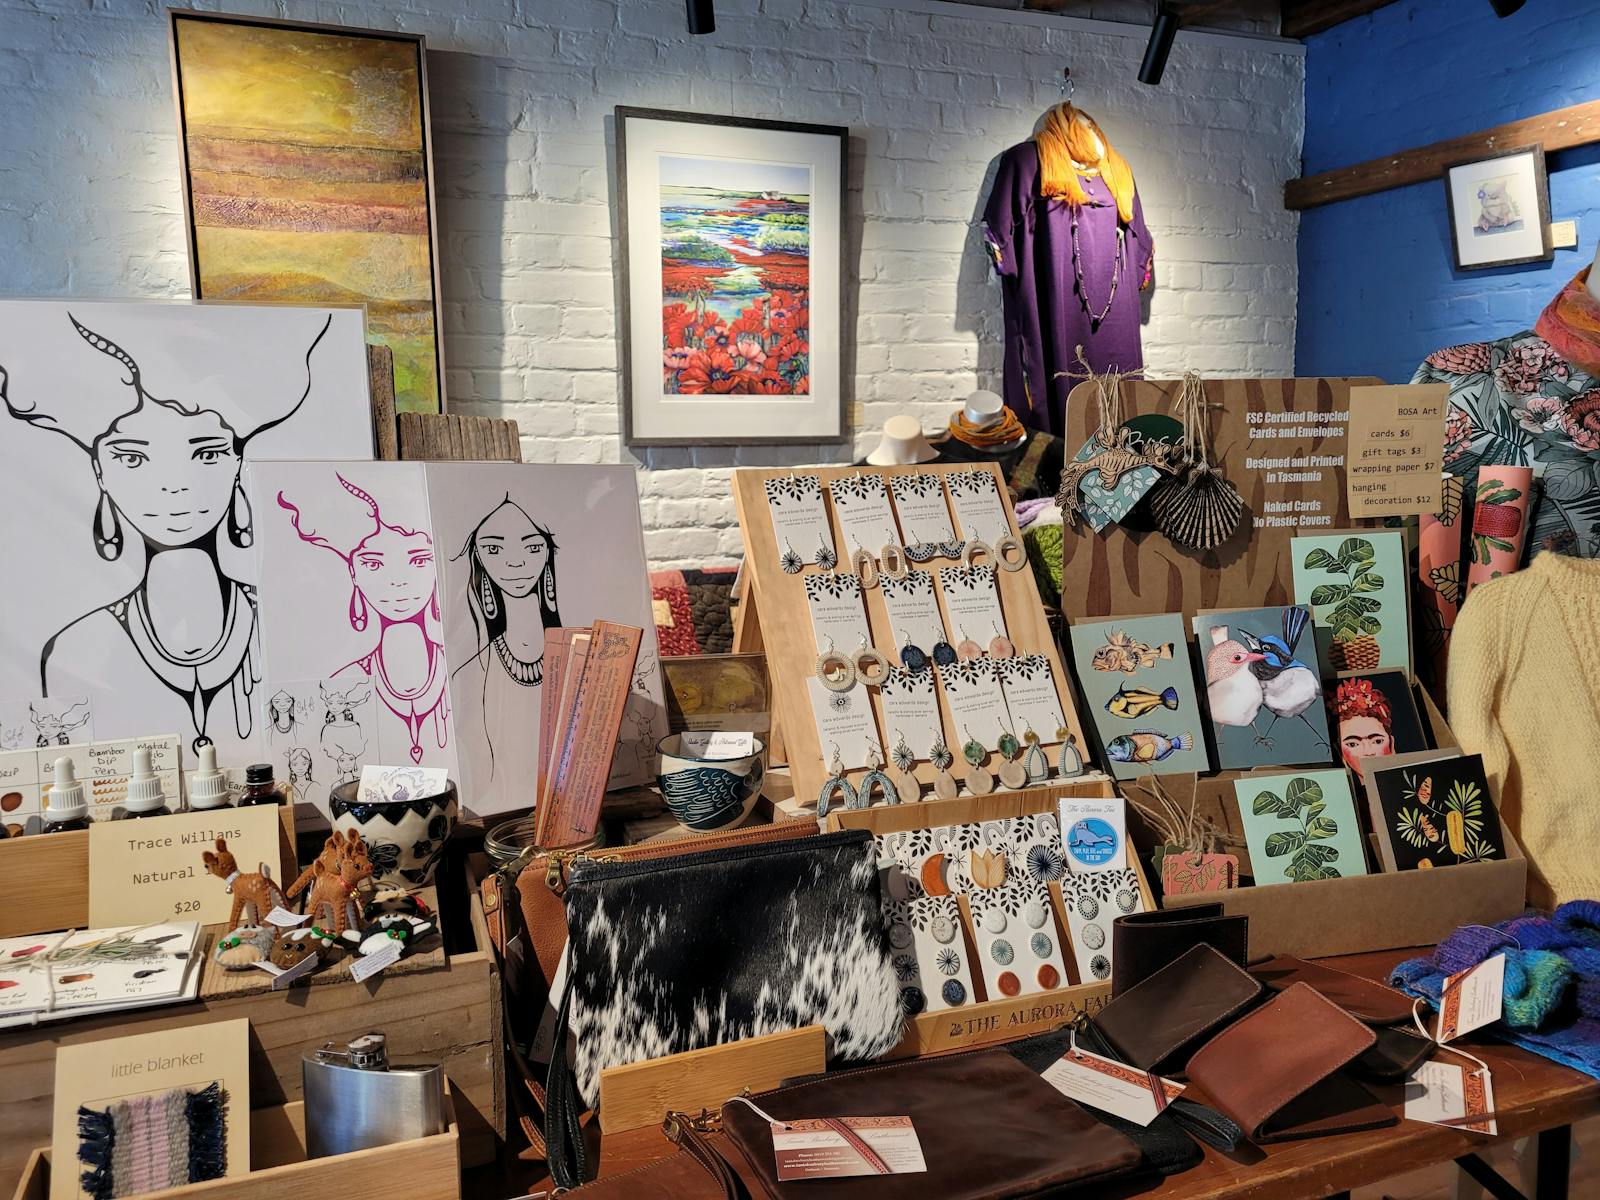 Art on white and blue walls, prints, earrings, bags and cards on display for sale on a central table